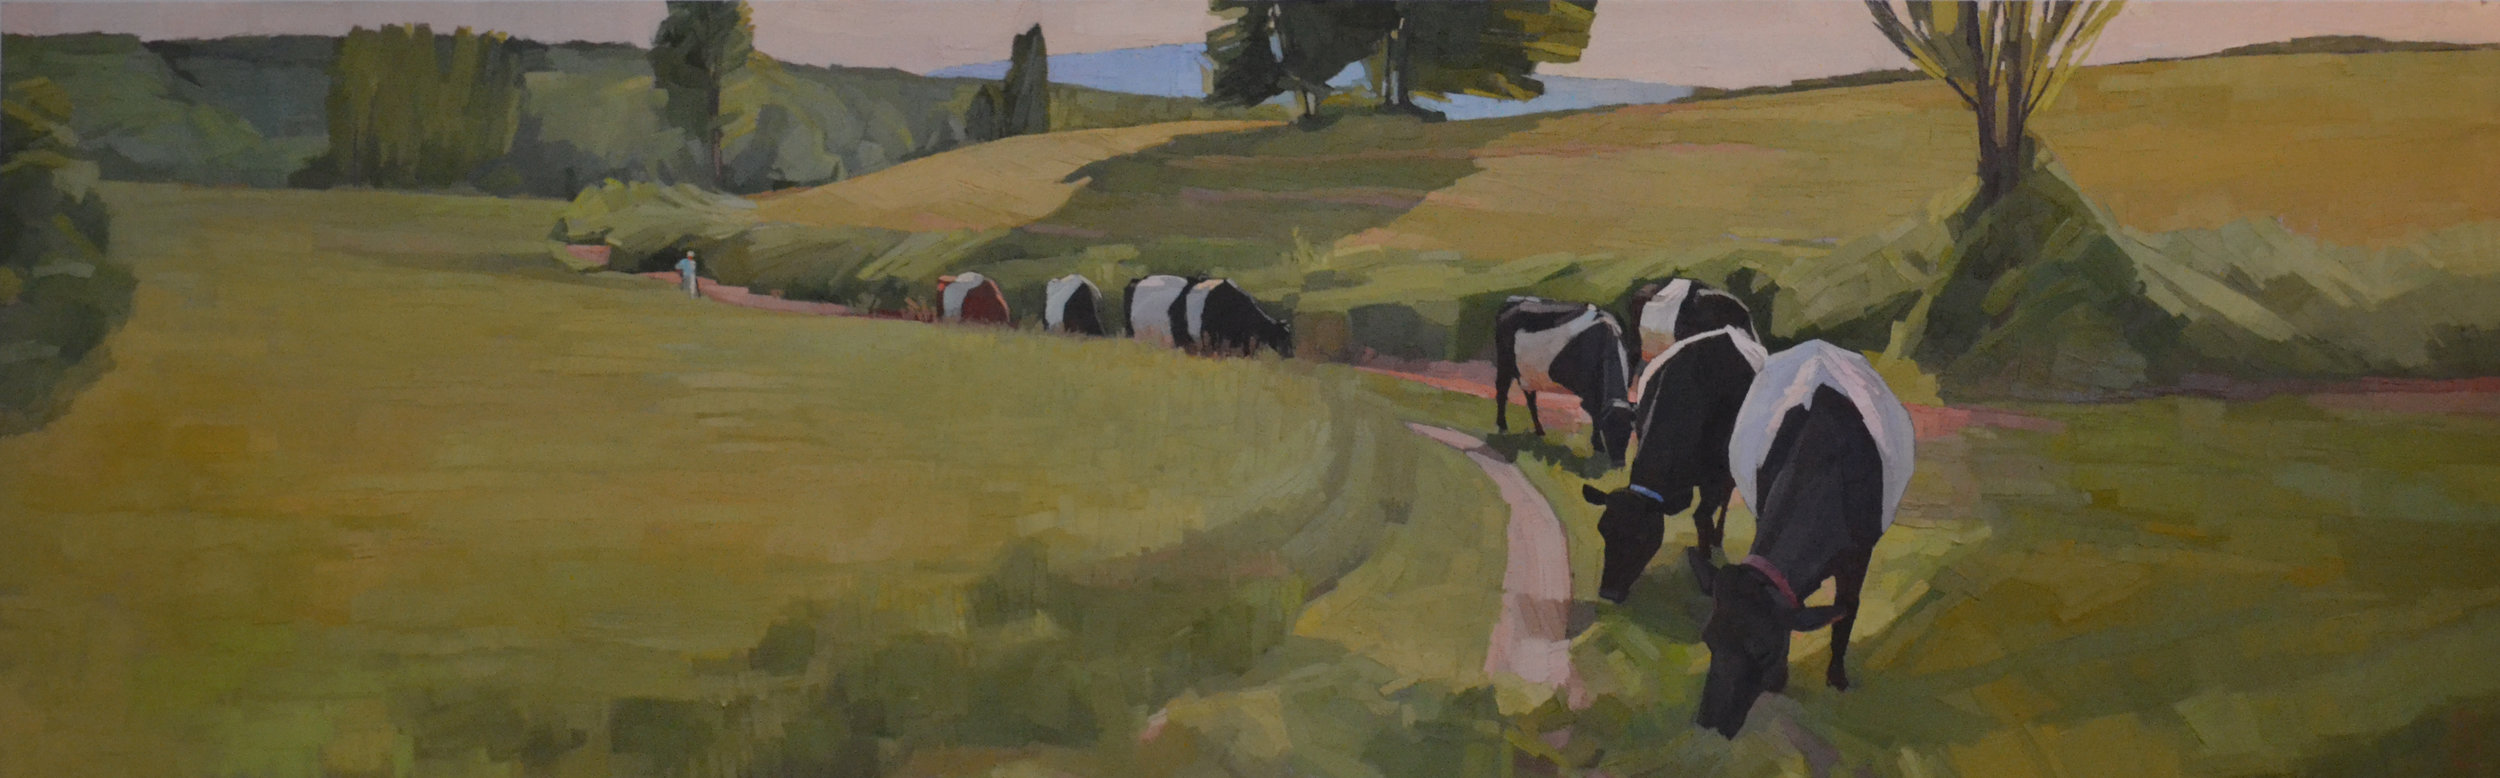   The Good Shepherdess  30 x 96 oil on linen  Commission for Tory and Tom Vallely 